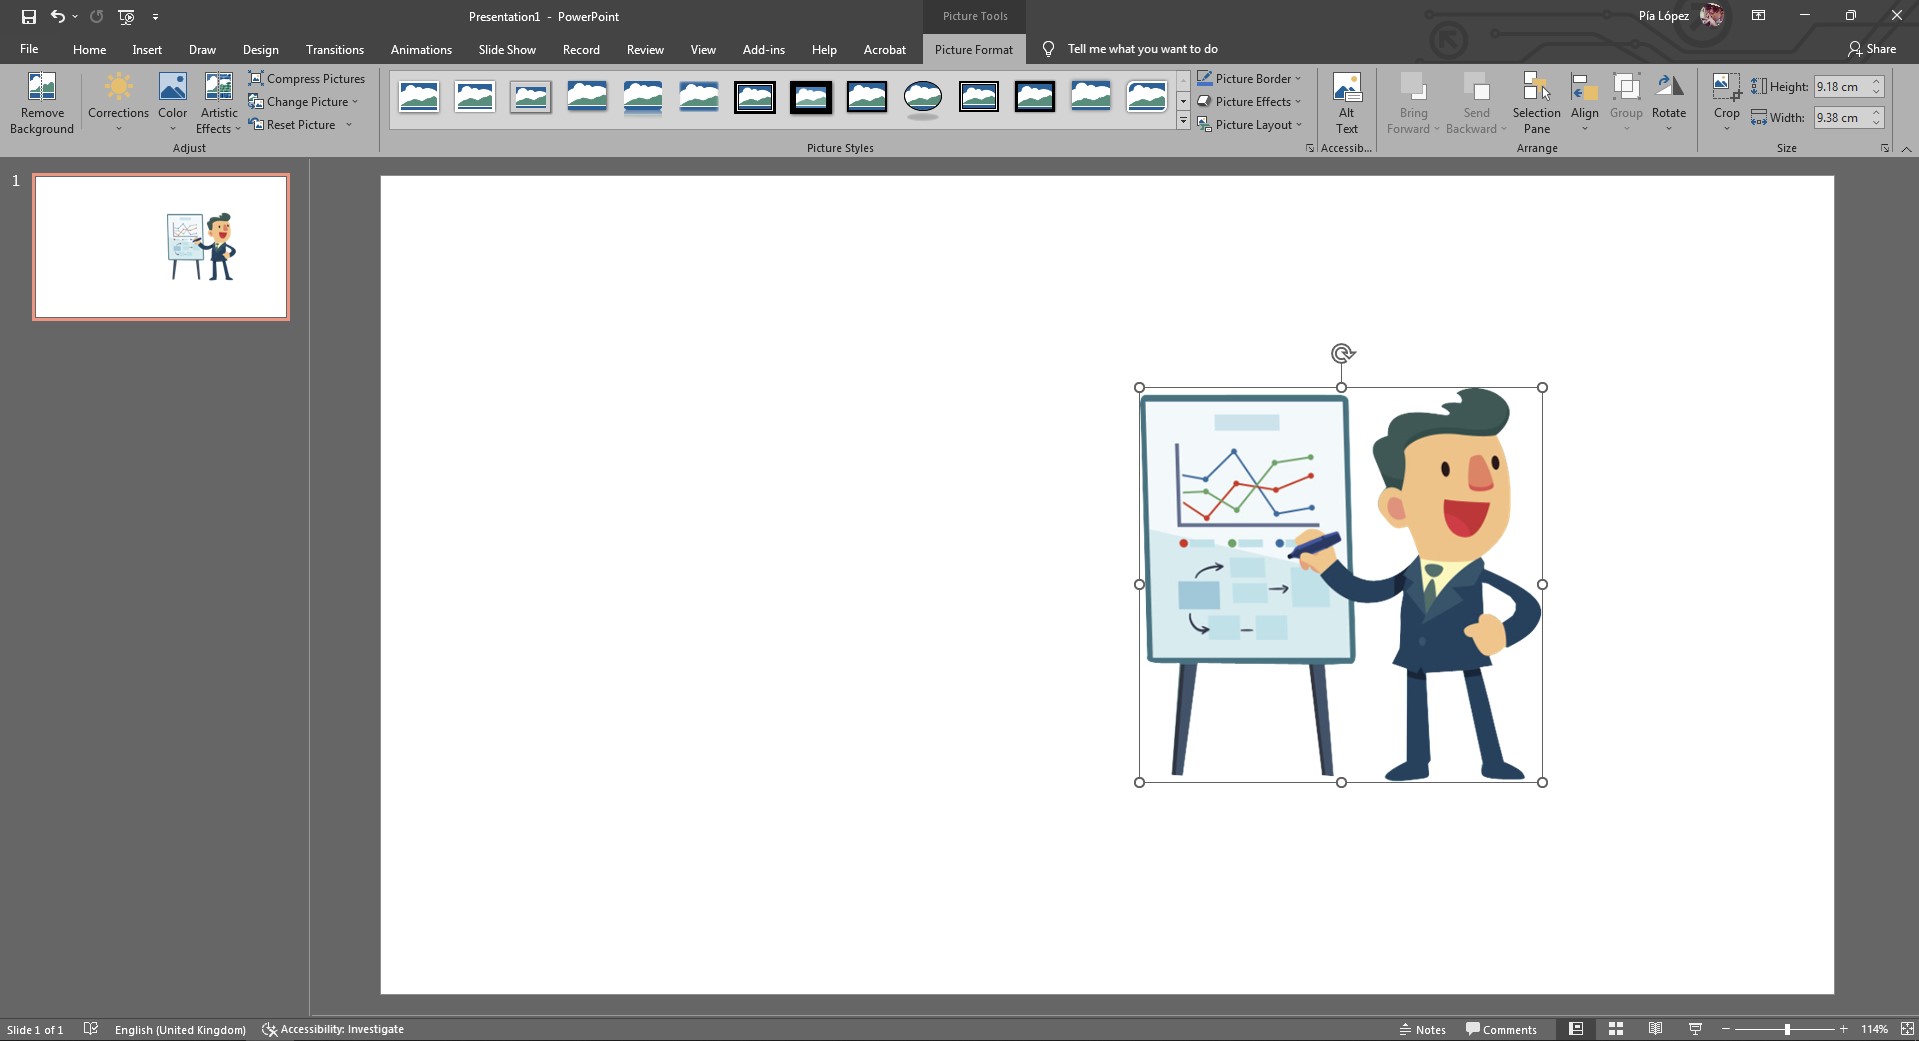 inserted clipart in a PowerPoint slide